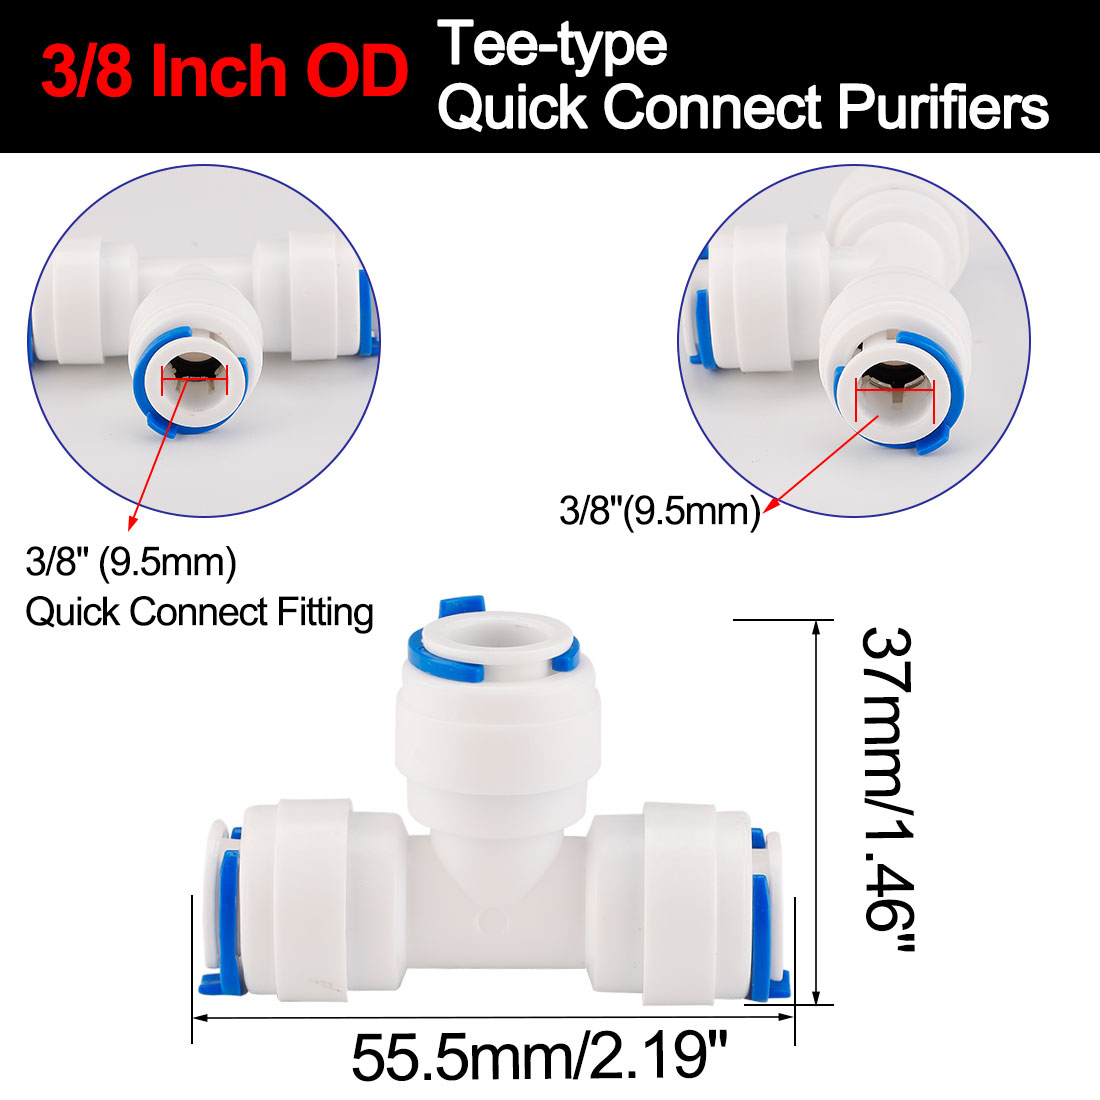 Unique Bargains 3/8 Inch OD Tee-type Quick Connect Purifiers Tube Push in Fittings 3pcs